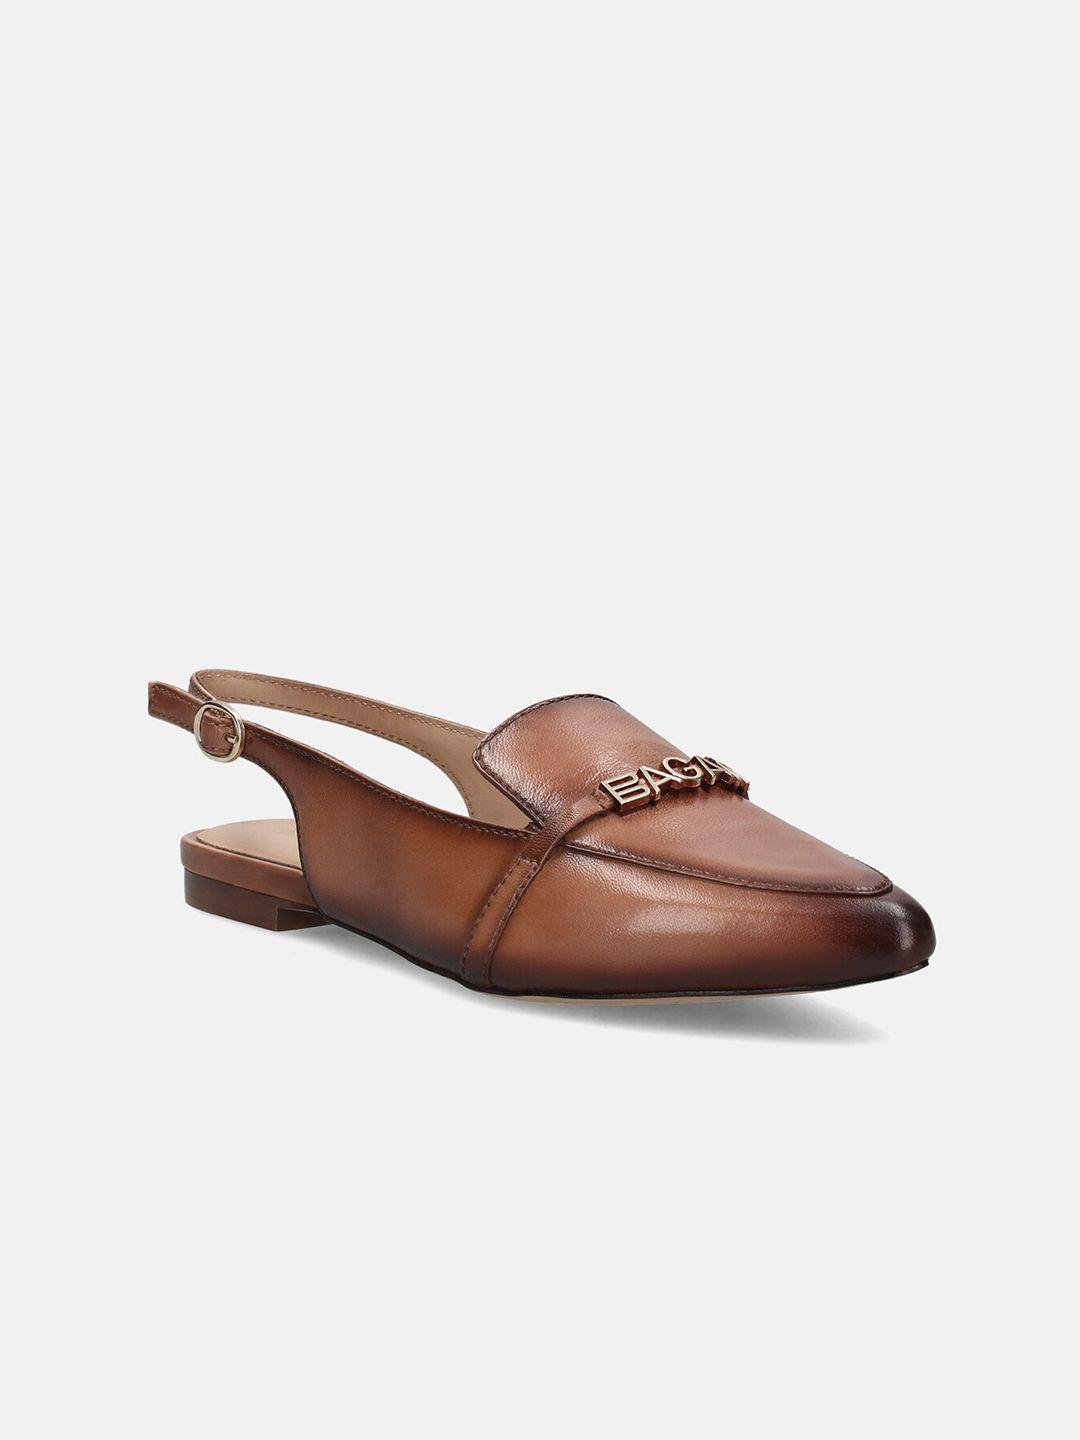 bagatt textured buckled pointed toe mules